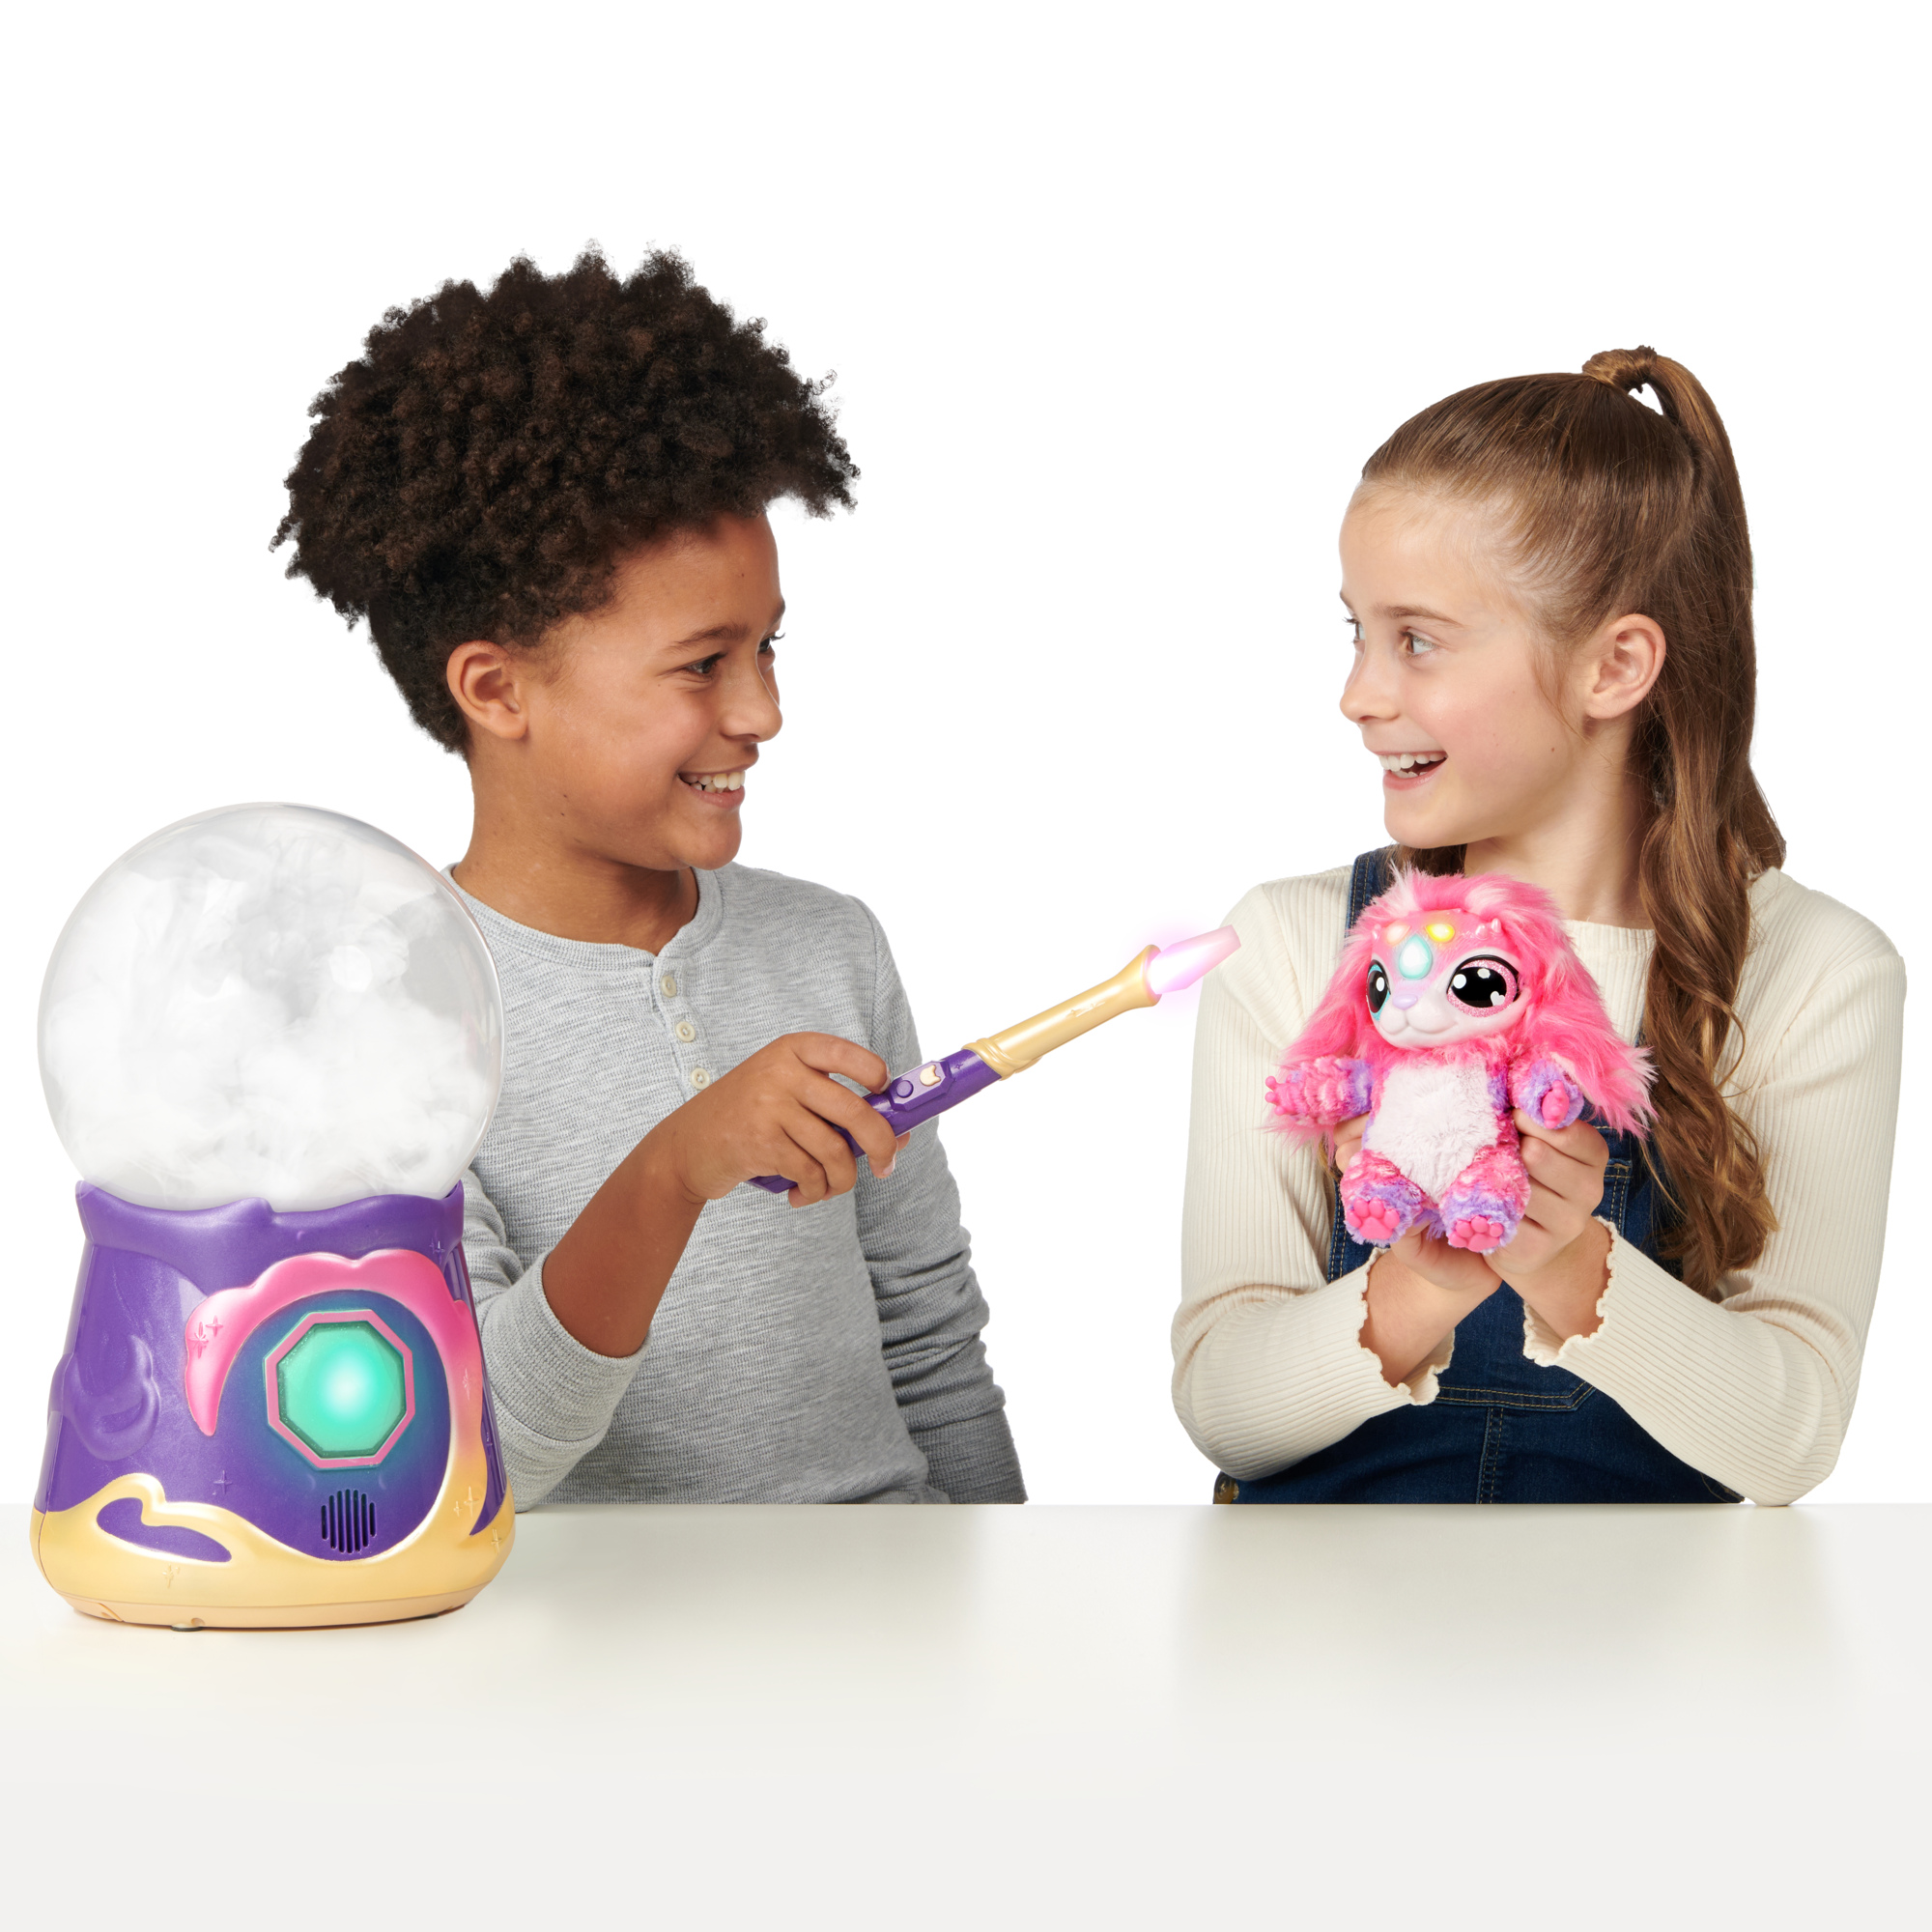 Magic Mixies Magical Misting Crystal Ball with Interactive 8 inch Pink Plush Toy Ages 5+ - image 12 of 18